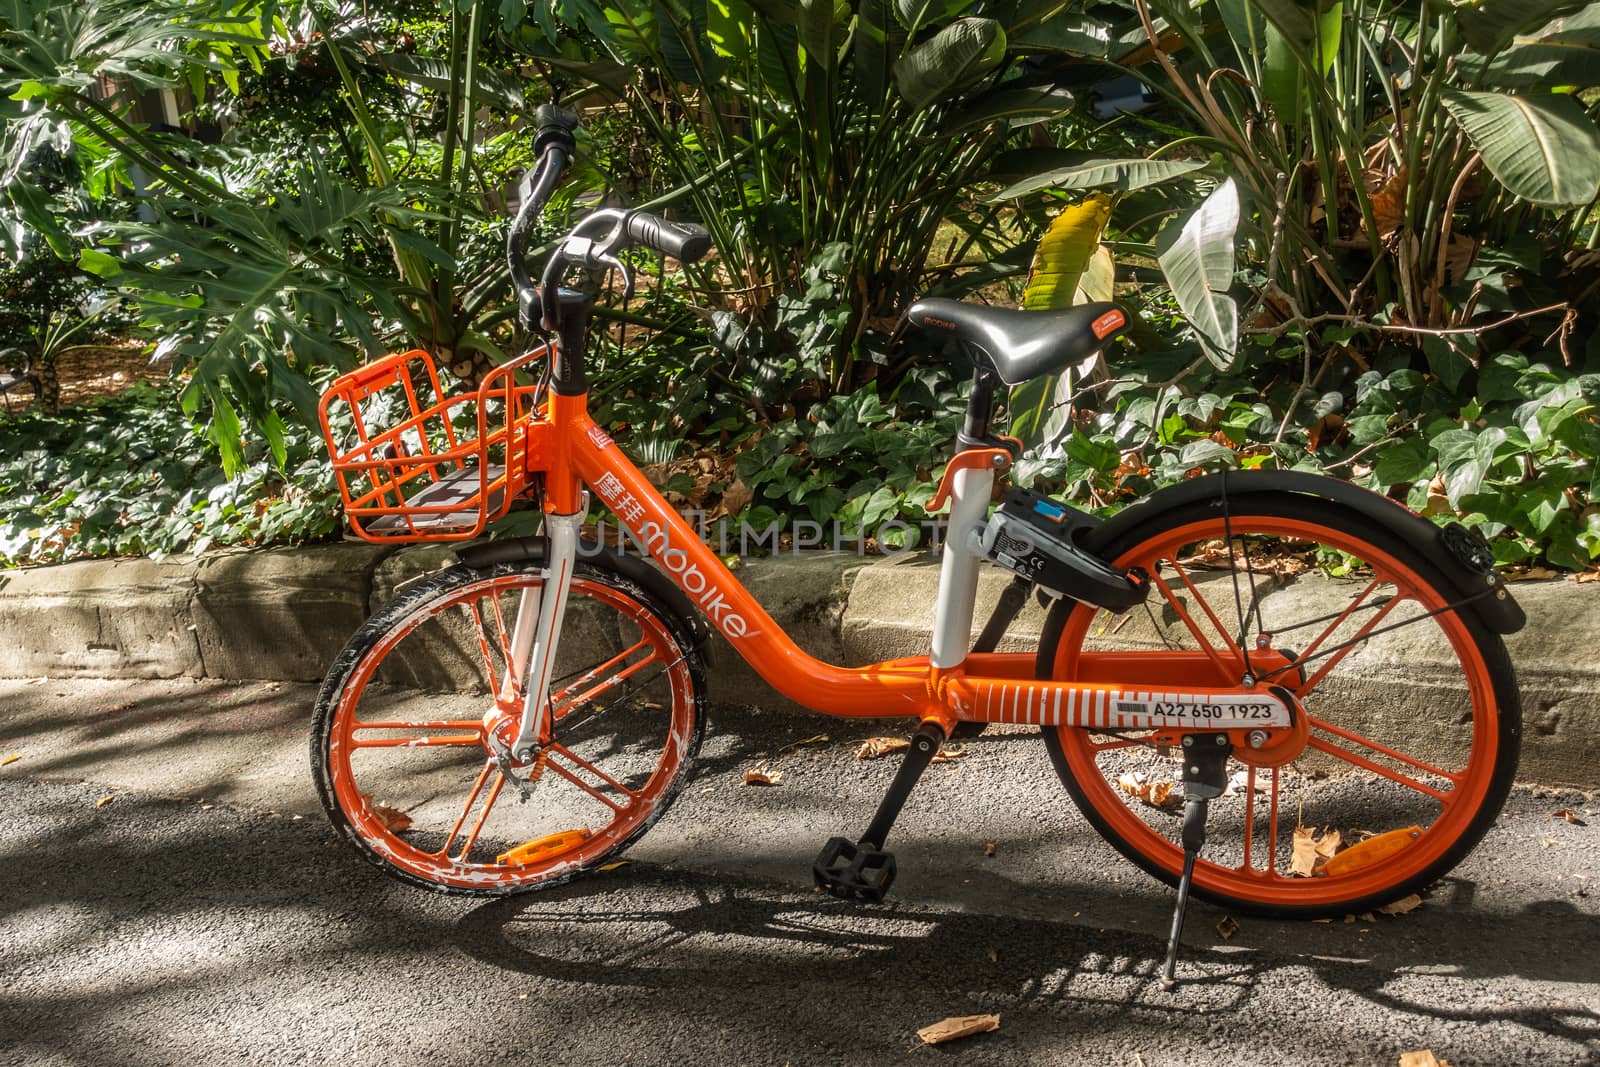 MOBIKE for rent parked at Lang Park, Sydney Australia. by Claudine